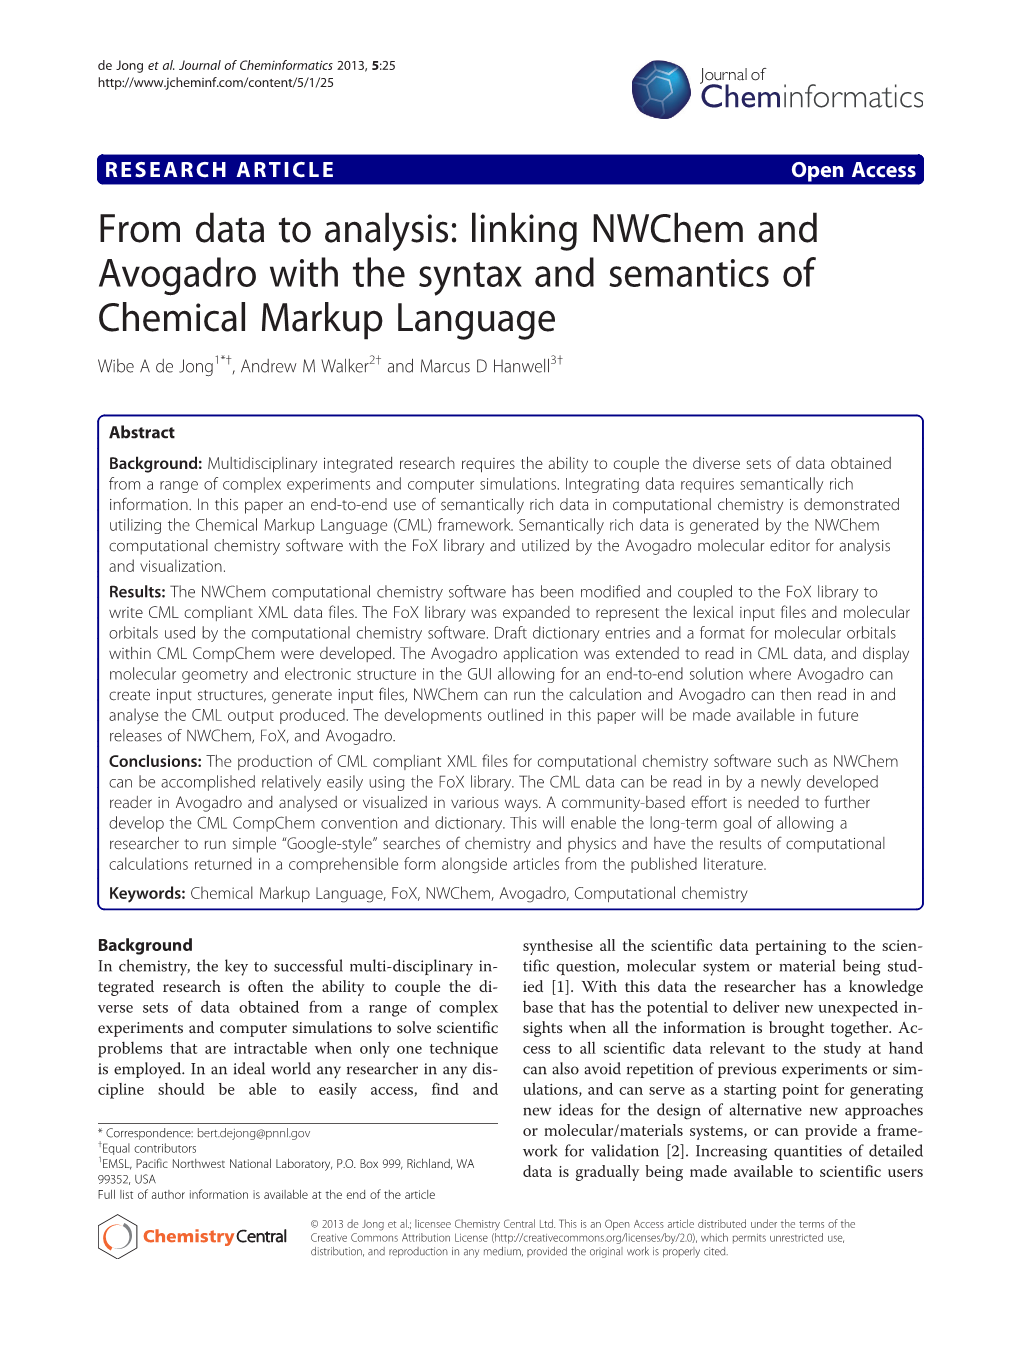 Linking Nwchem and Avogadro with the Syntax and Semantics of Chemical Markup Language Wibe a De Jong1*†, Andrew M Walker2† and Marcus D Hanwell3†